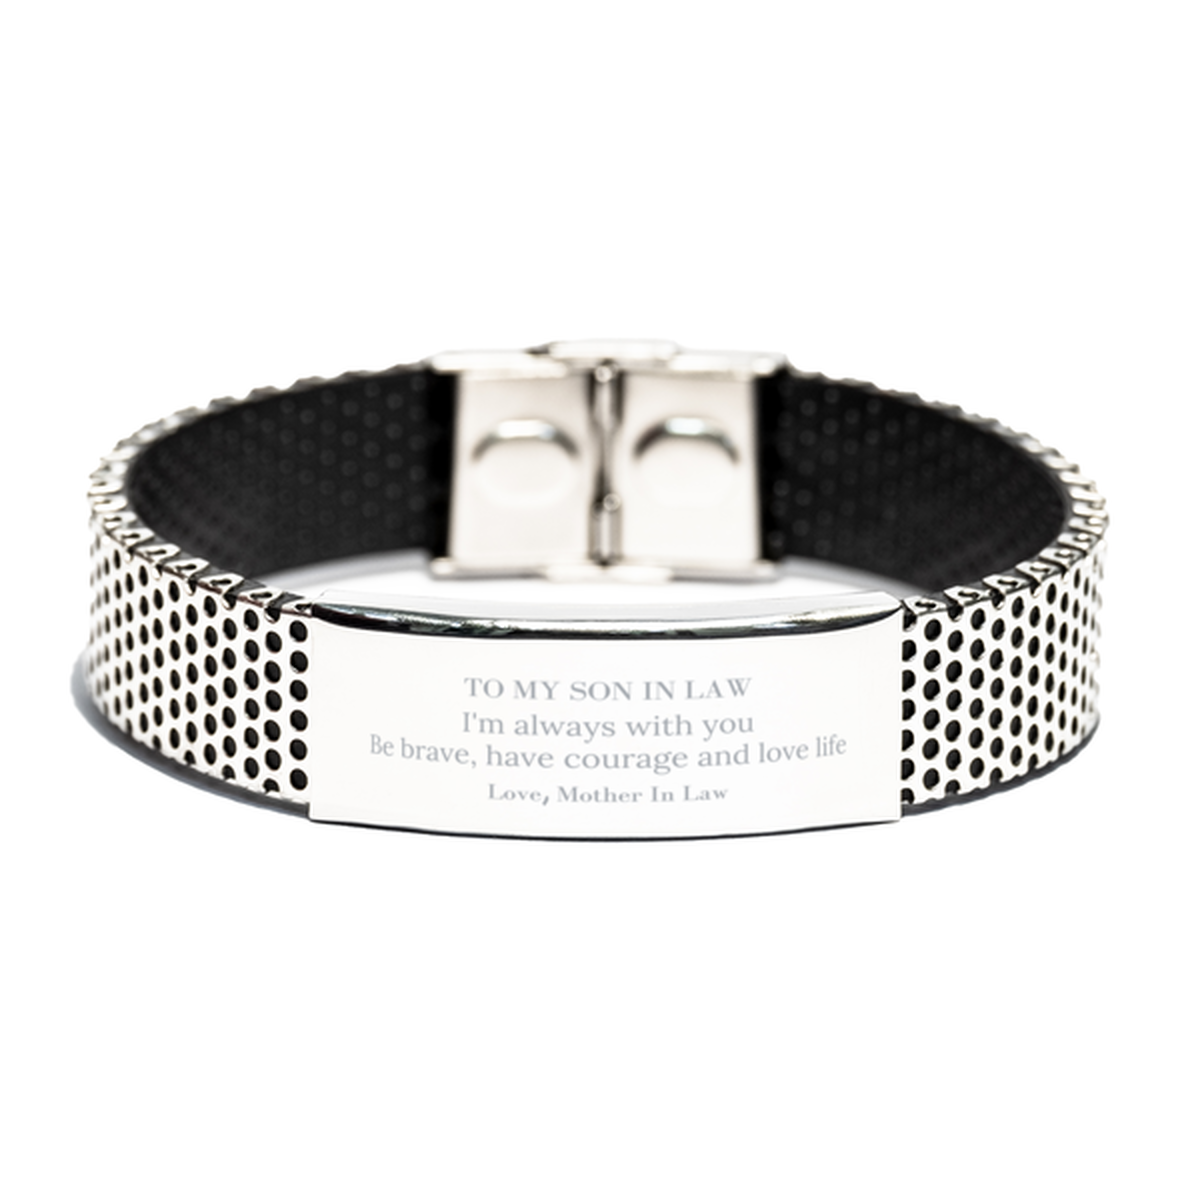 To My Son In Law Gifts from Mother In Law, Unique Stainless Steel Bracelet Inspirational Christmas Birthday Graduation Gifts for Son In Law I'm always with you. Be brave, have courage and love life. Love, Mother In Law